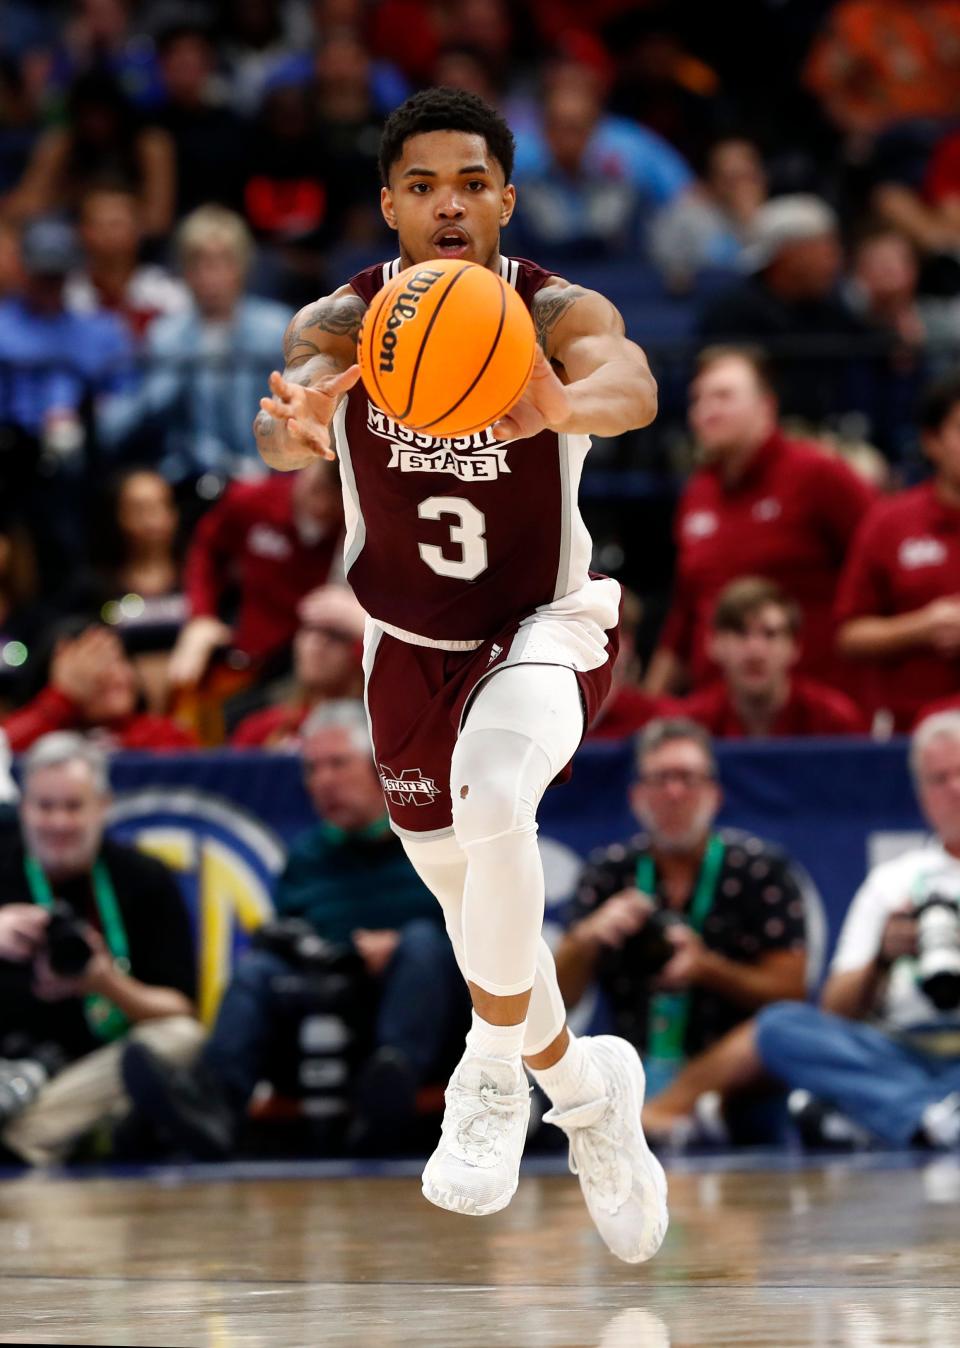 Mar 10, 2022; Tampa, FL, USA; Mississippi State Bulldogs guard Shakeel Moore (3) passes the ball against the South Carolina Gamecocks during the second half at Amalie Arena. Mandatory Credit: Kim Klement-USA TODAY Sports